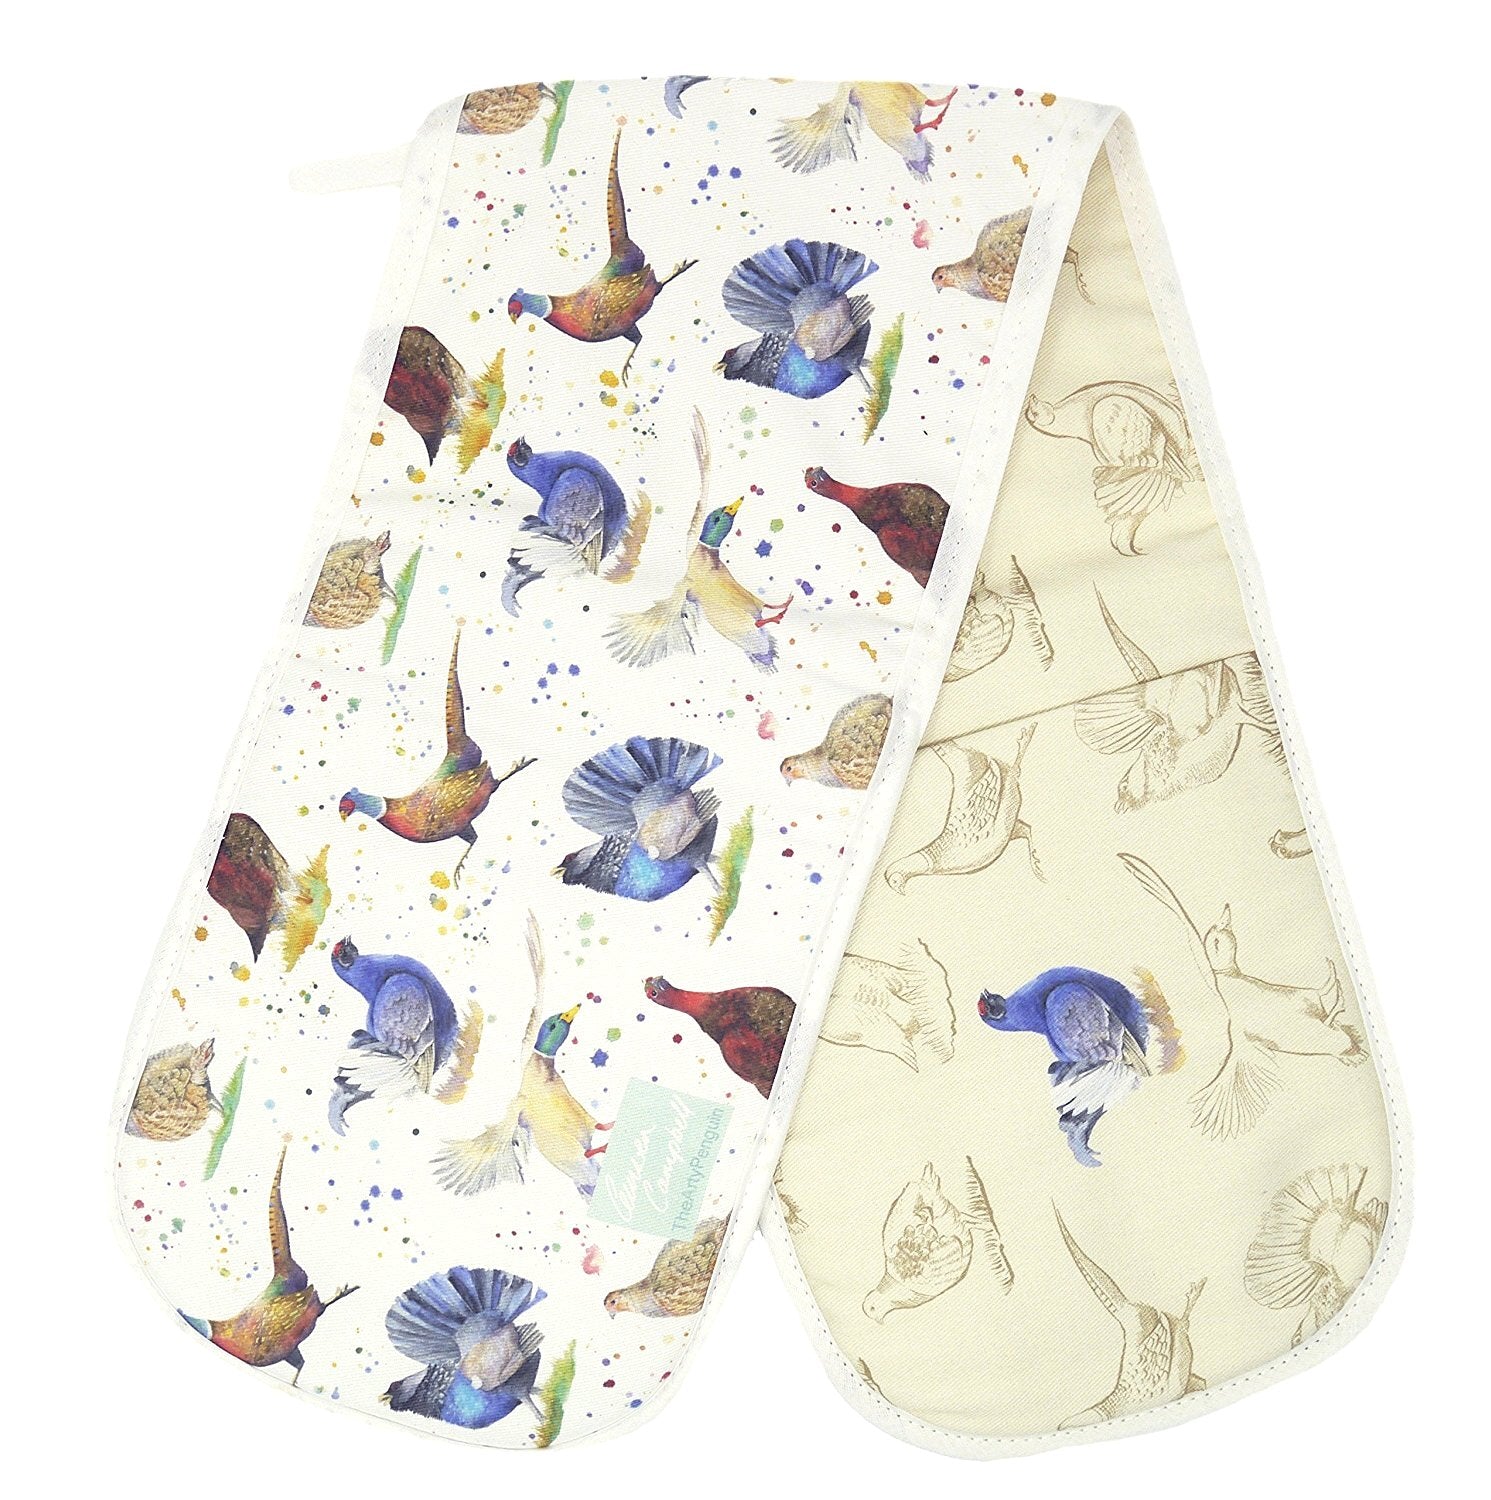 Pheasant duck capercaillie grouse game birds gift double oven gloves Ceinwen Campbell The Arty Penguin 